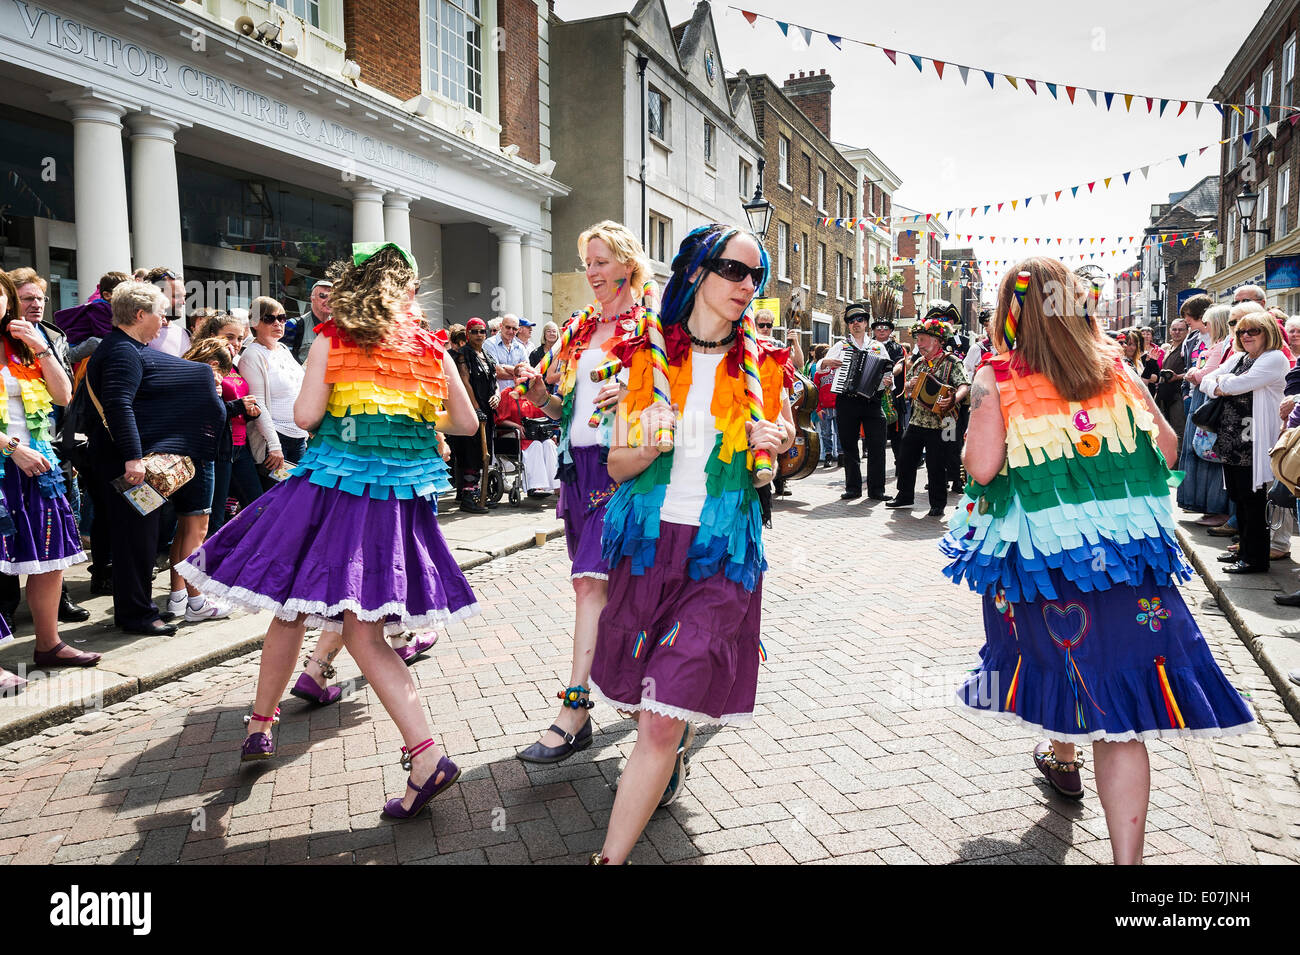 Rochester, Kent, UK. 5th May, 2014. The Sweeps Festival in Rochester, Kent, UK takes place in Rochester over the May Bank Holiday weekend.  The festival recreates the joy and laughter enjoyed by chimney sweeps on their traditional holiday.  The festival, with its Morris dancing and music, has become one of the most important May festivals in Europe.  Photographer:  Gordon Scammell/Alamy Live News Stock Photo